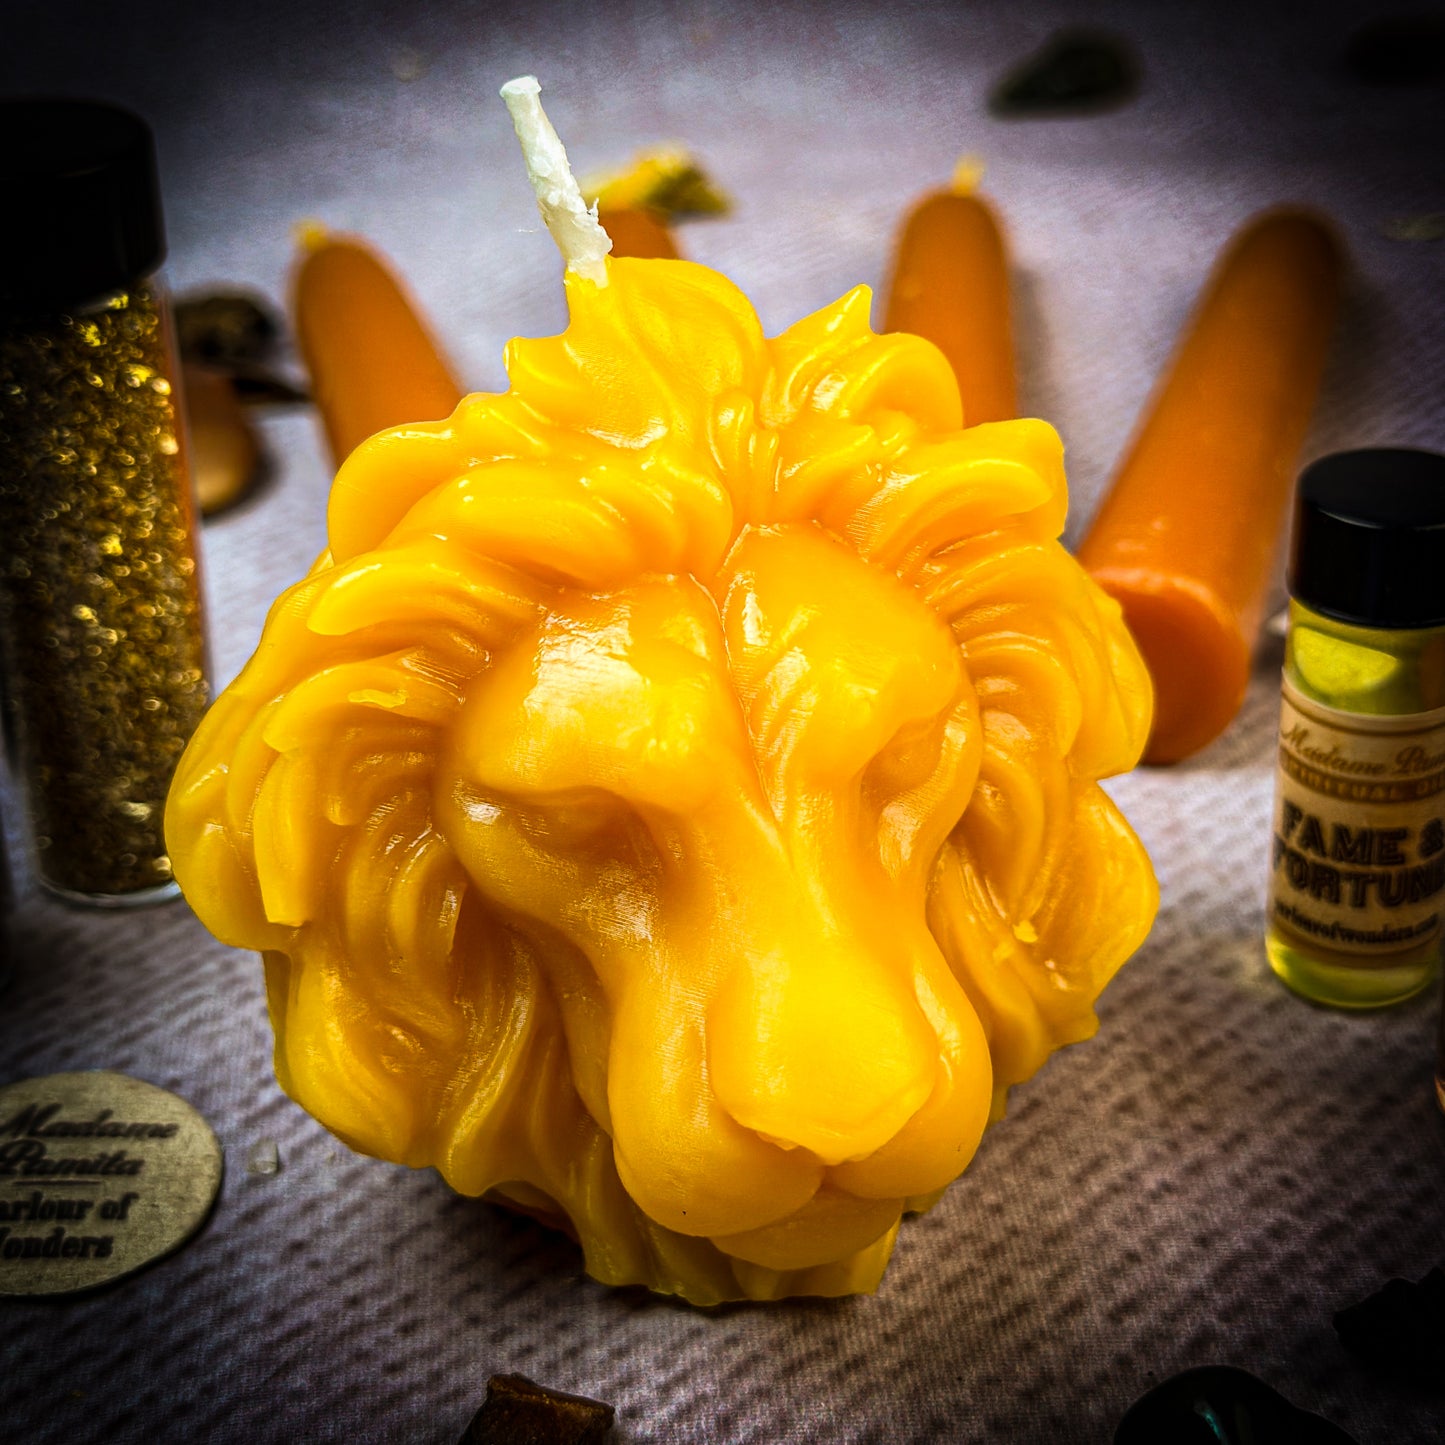 Limited Edition Lion's Gate Portal Candle Spell Kit